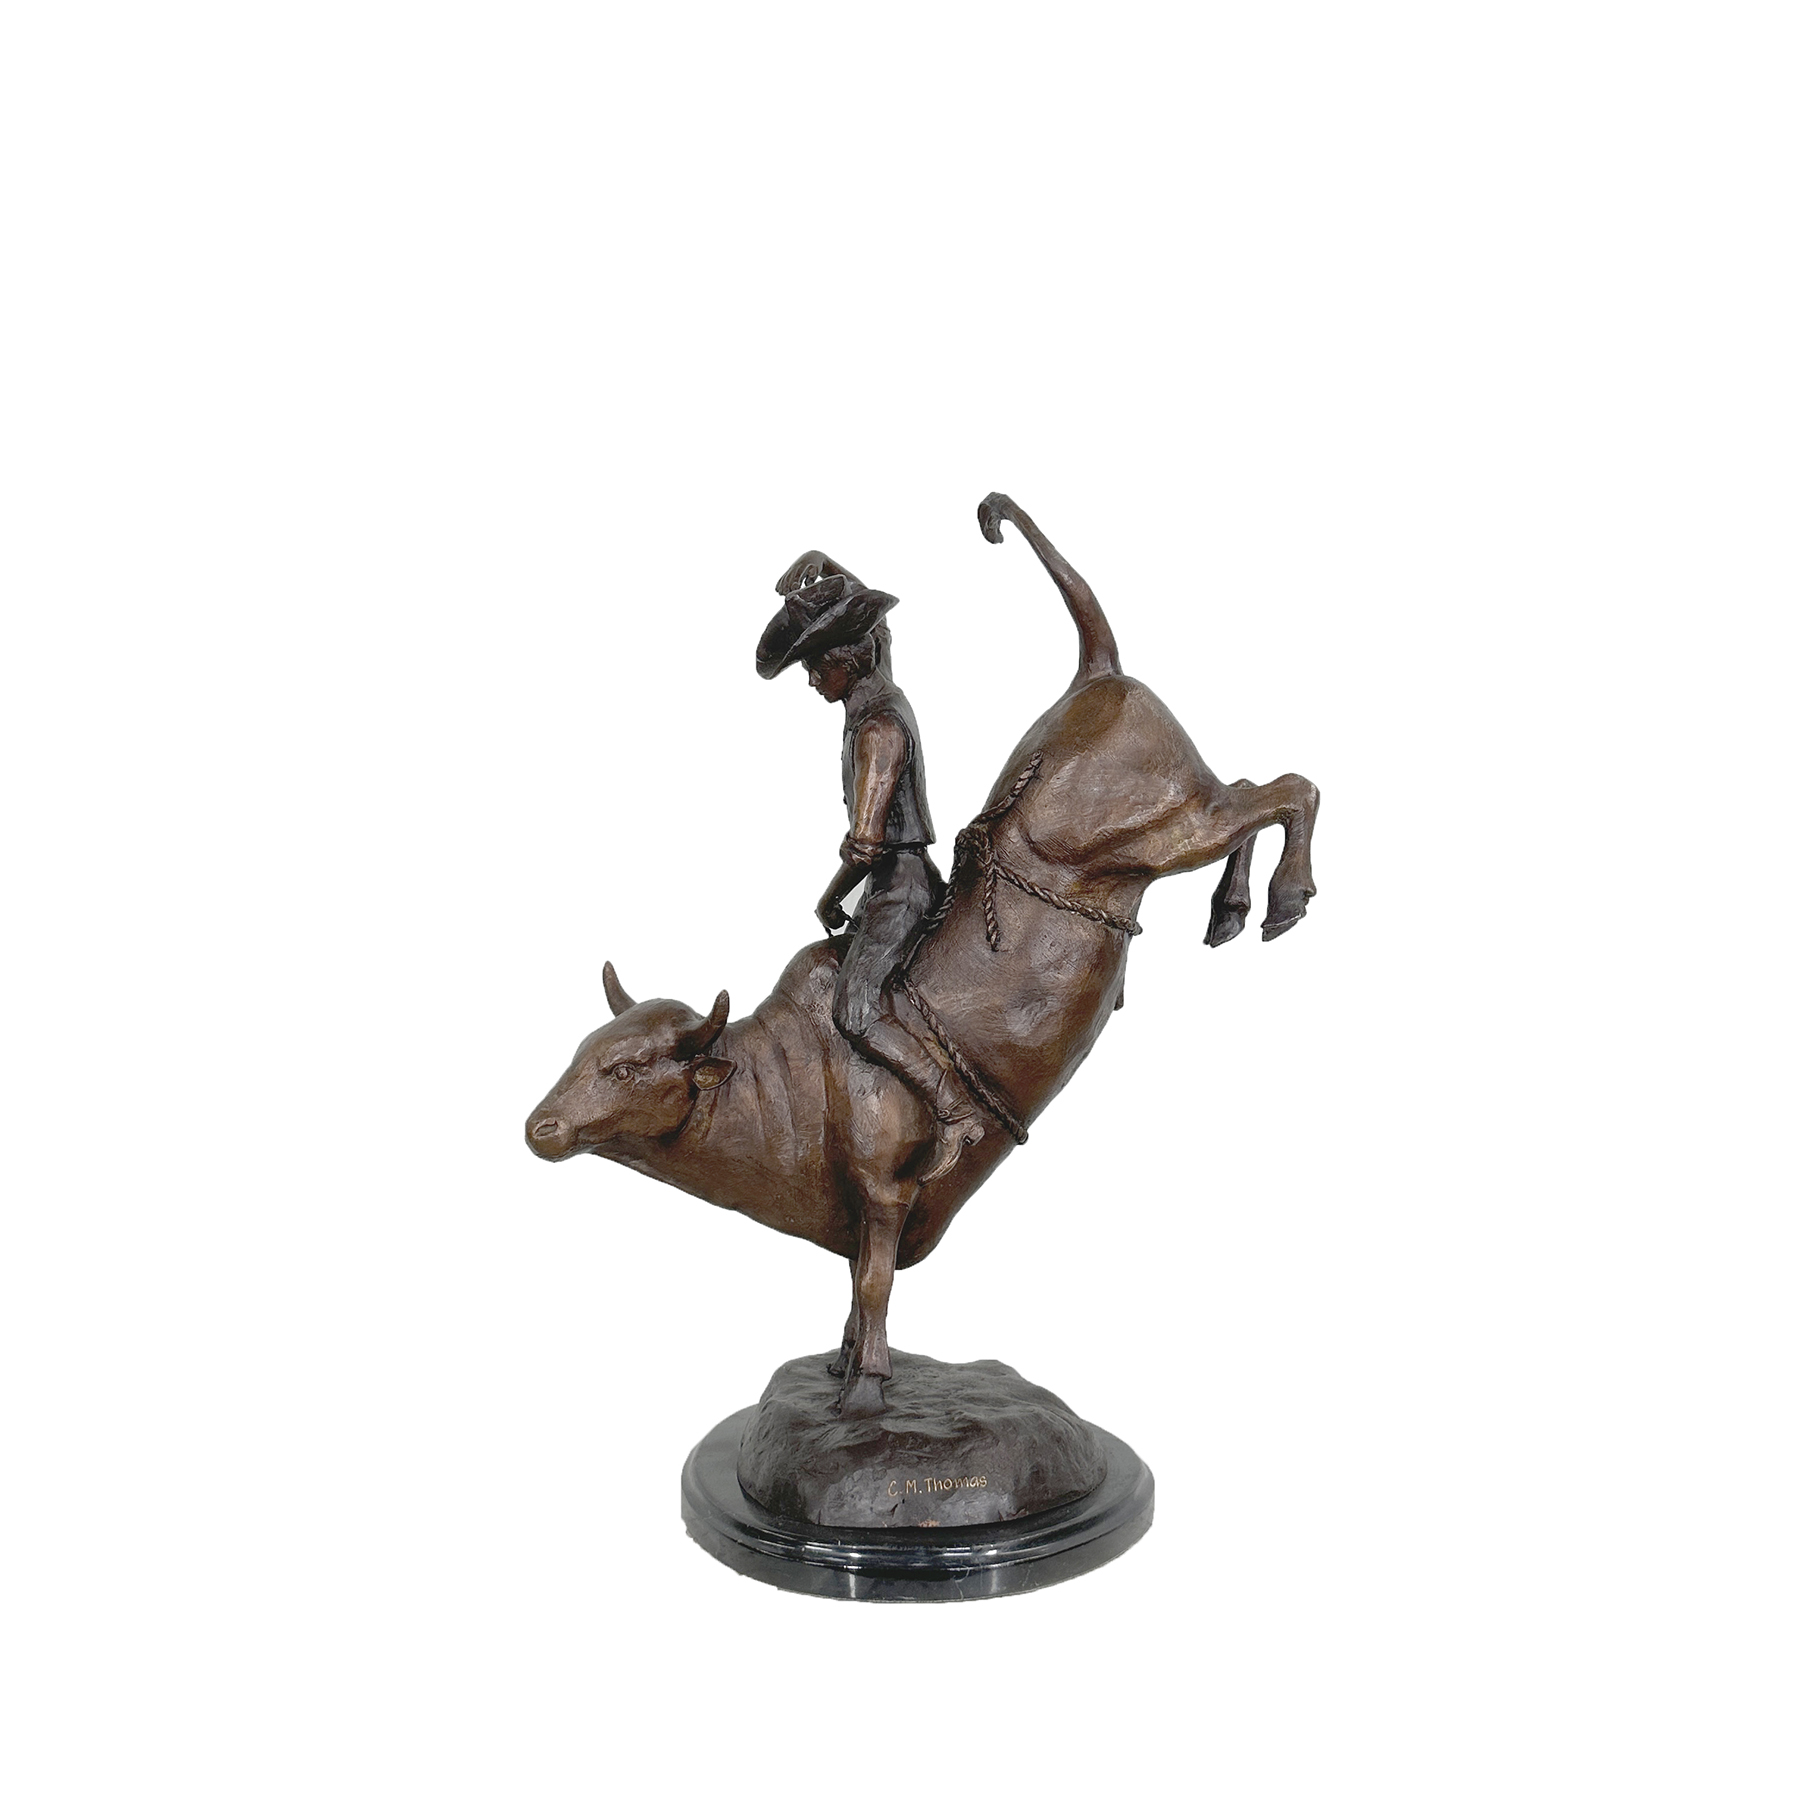 SRB057492 Bronze Rodeo Rider on Bull Table-top Sculpture by Metropolitan Galleries Inc